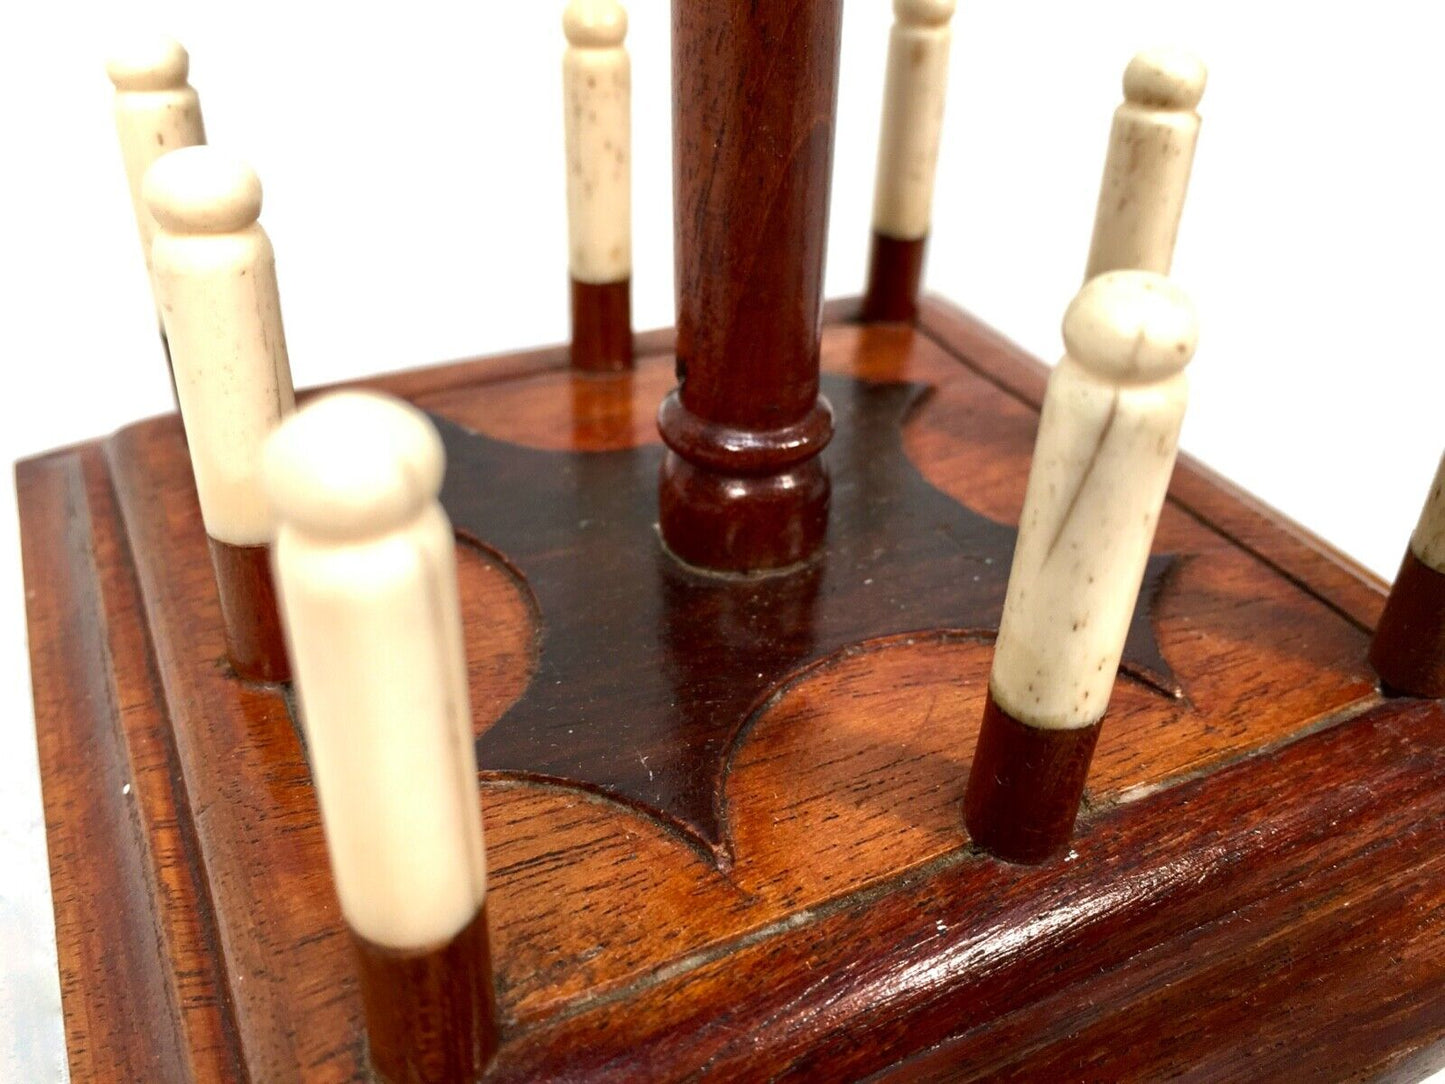 Victorian Mahogany Sewing Stand - Cotton Spool Holder - Pin Cushion - Antique